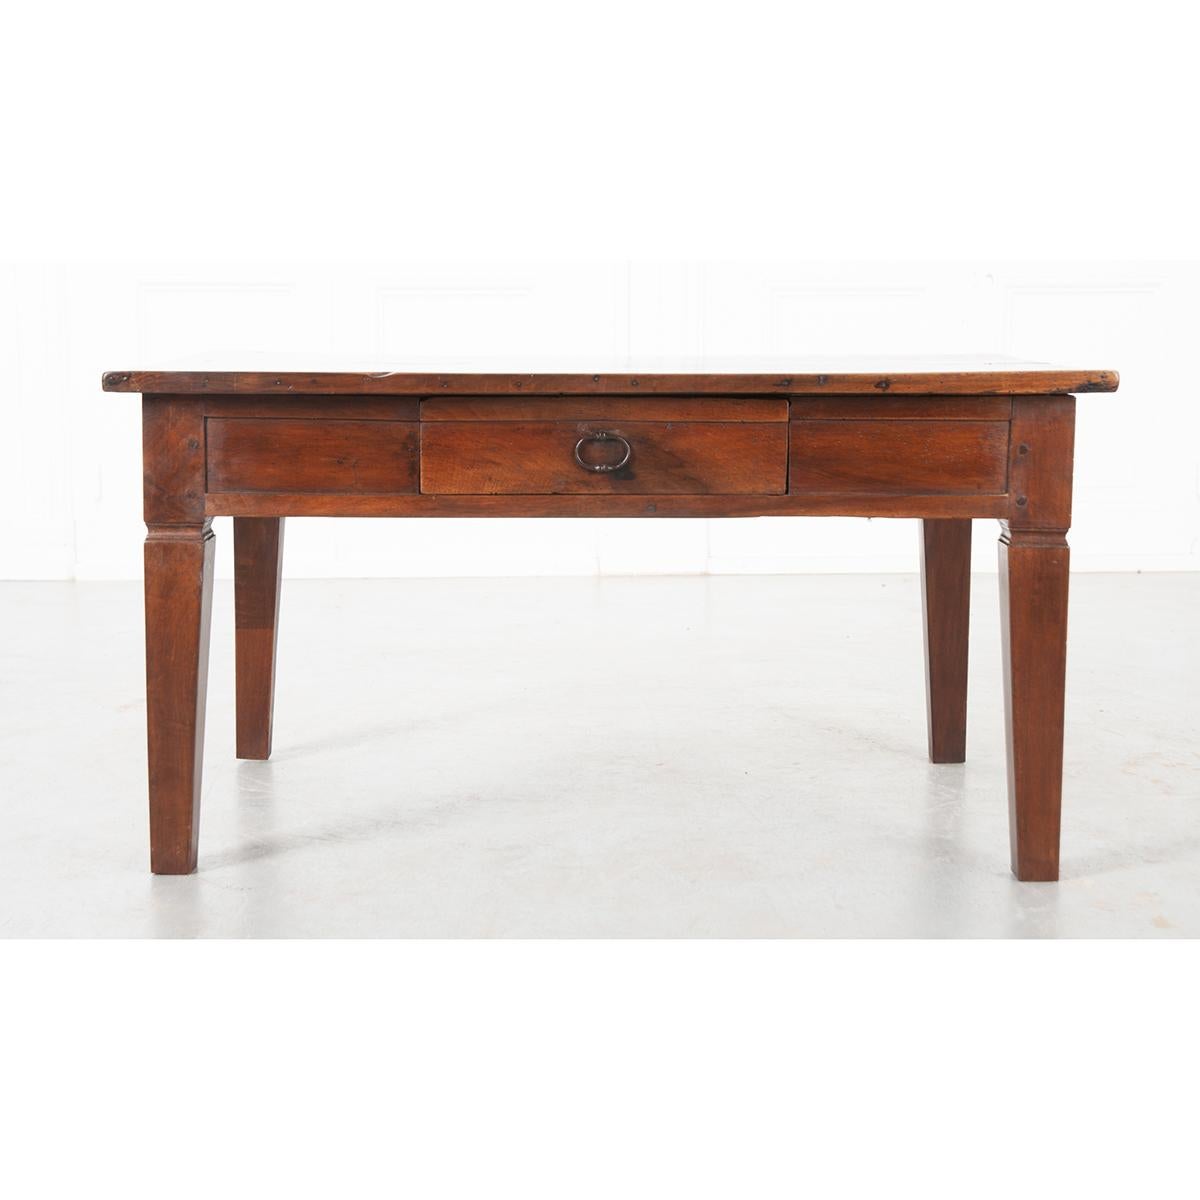 This is a French 19th century walnut low table. It is circa 1840 and put together with wood pegs. The top is made of two wide boards sitting over an apron with a single drawer which has an iron pull. All sit on straight tapered legs with a notch